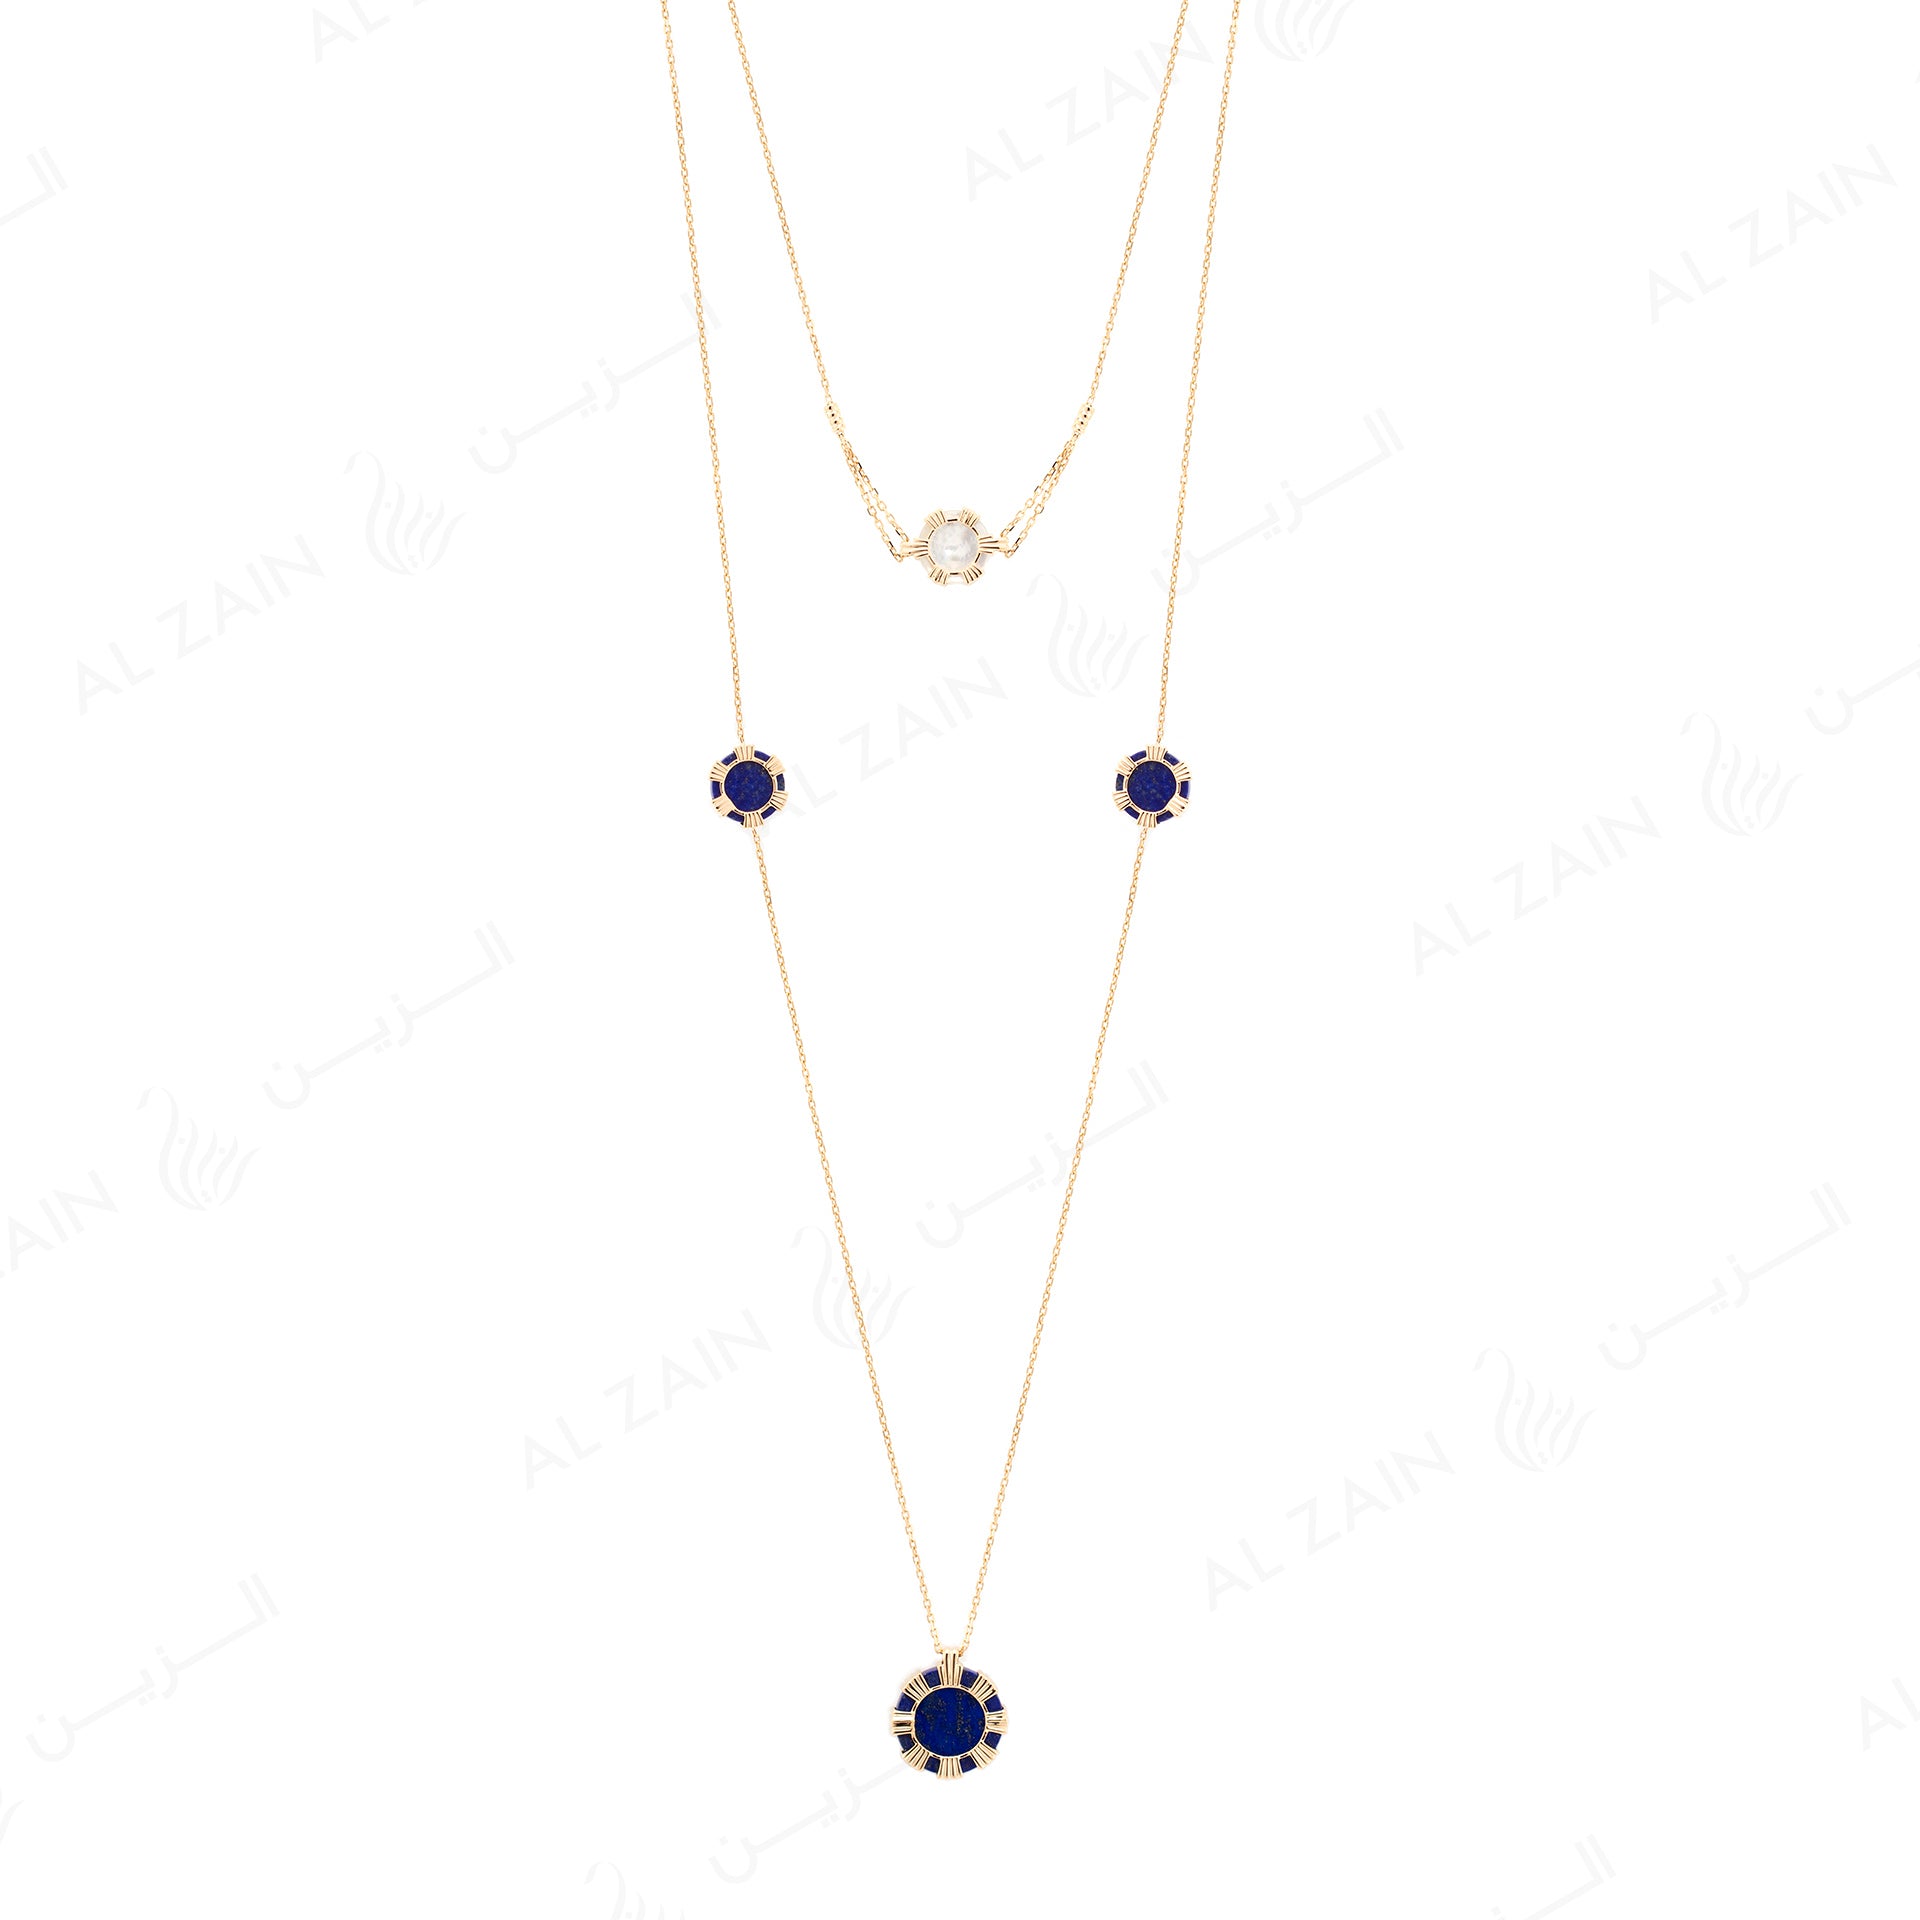 Cordoba necklace in yellow gold with lapis and mother of pearl stones